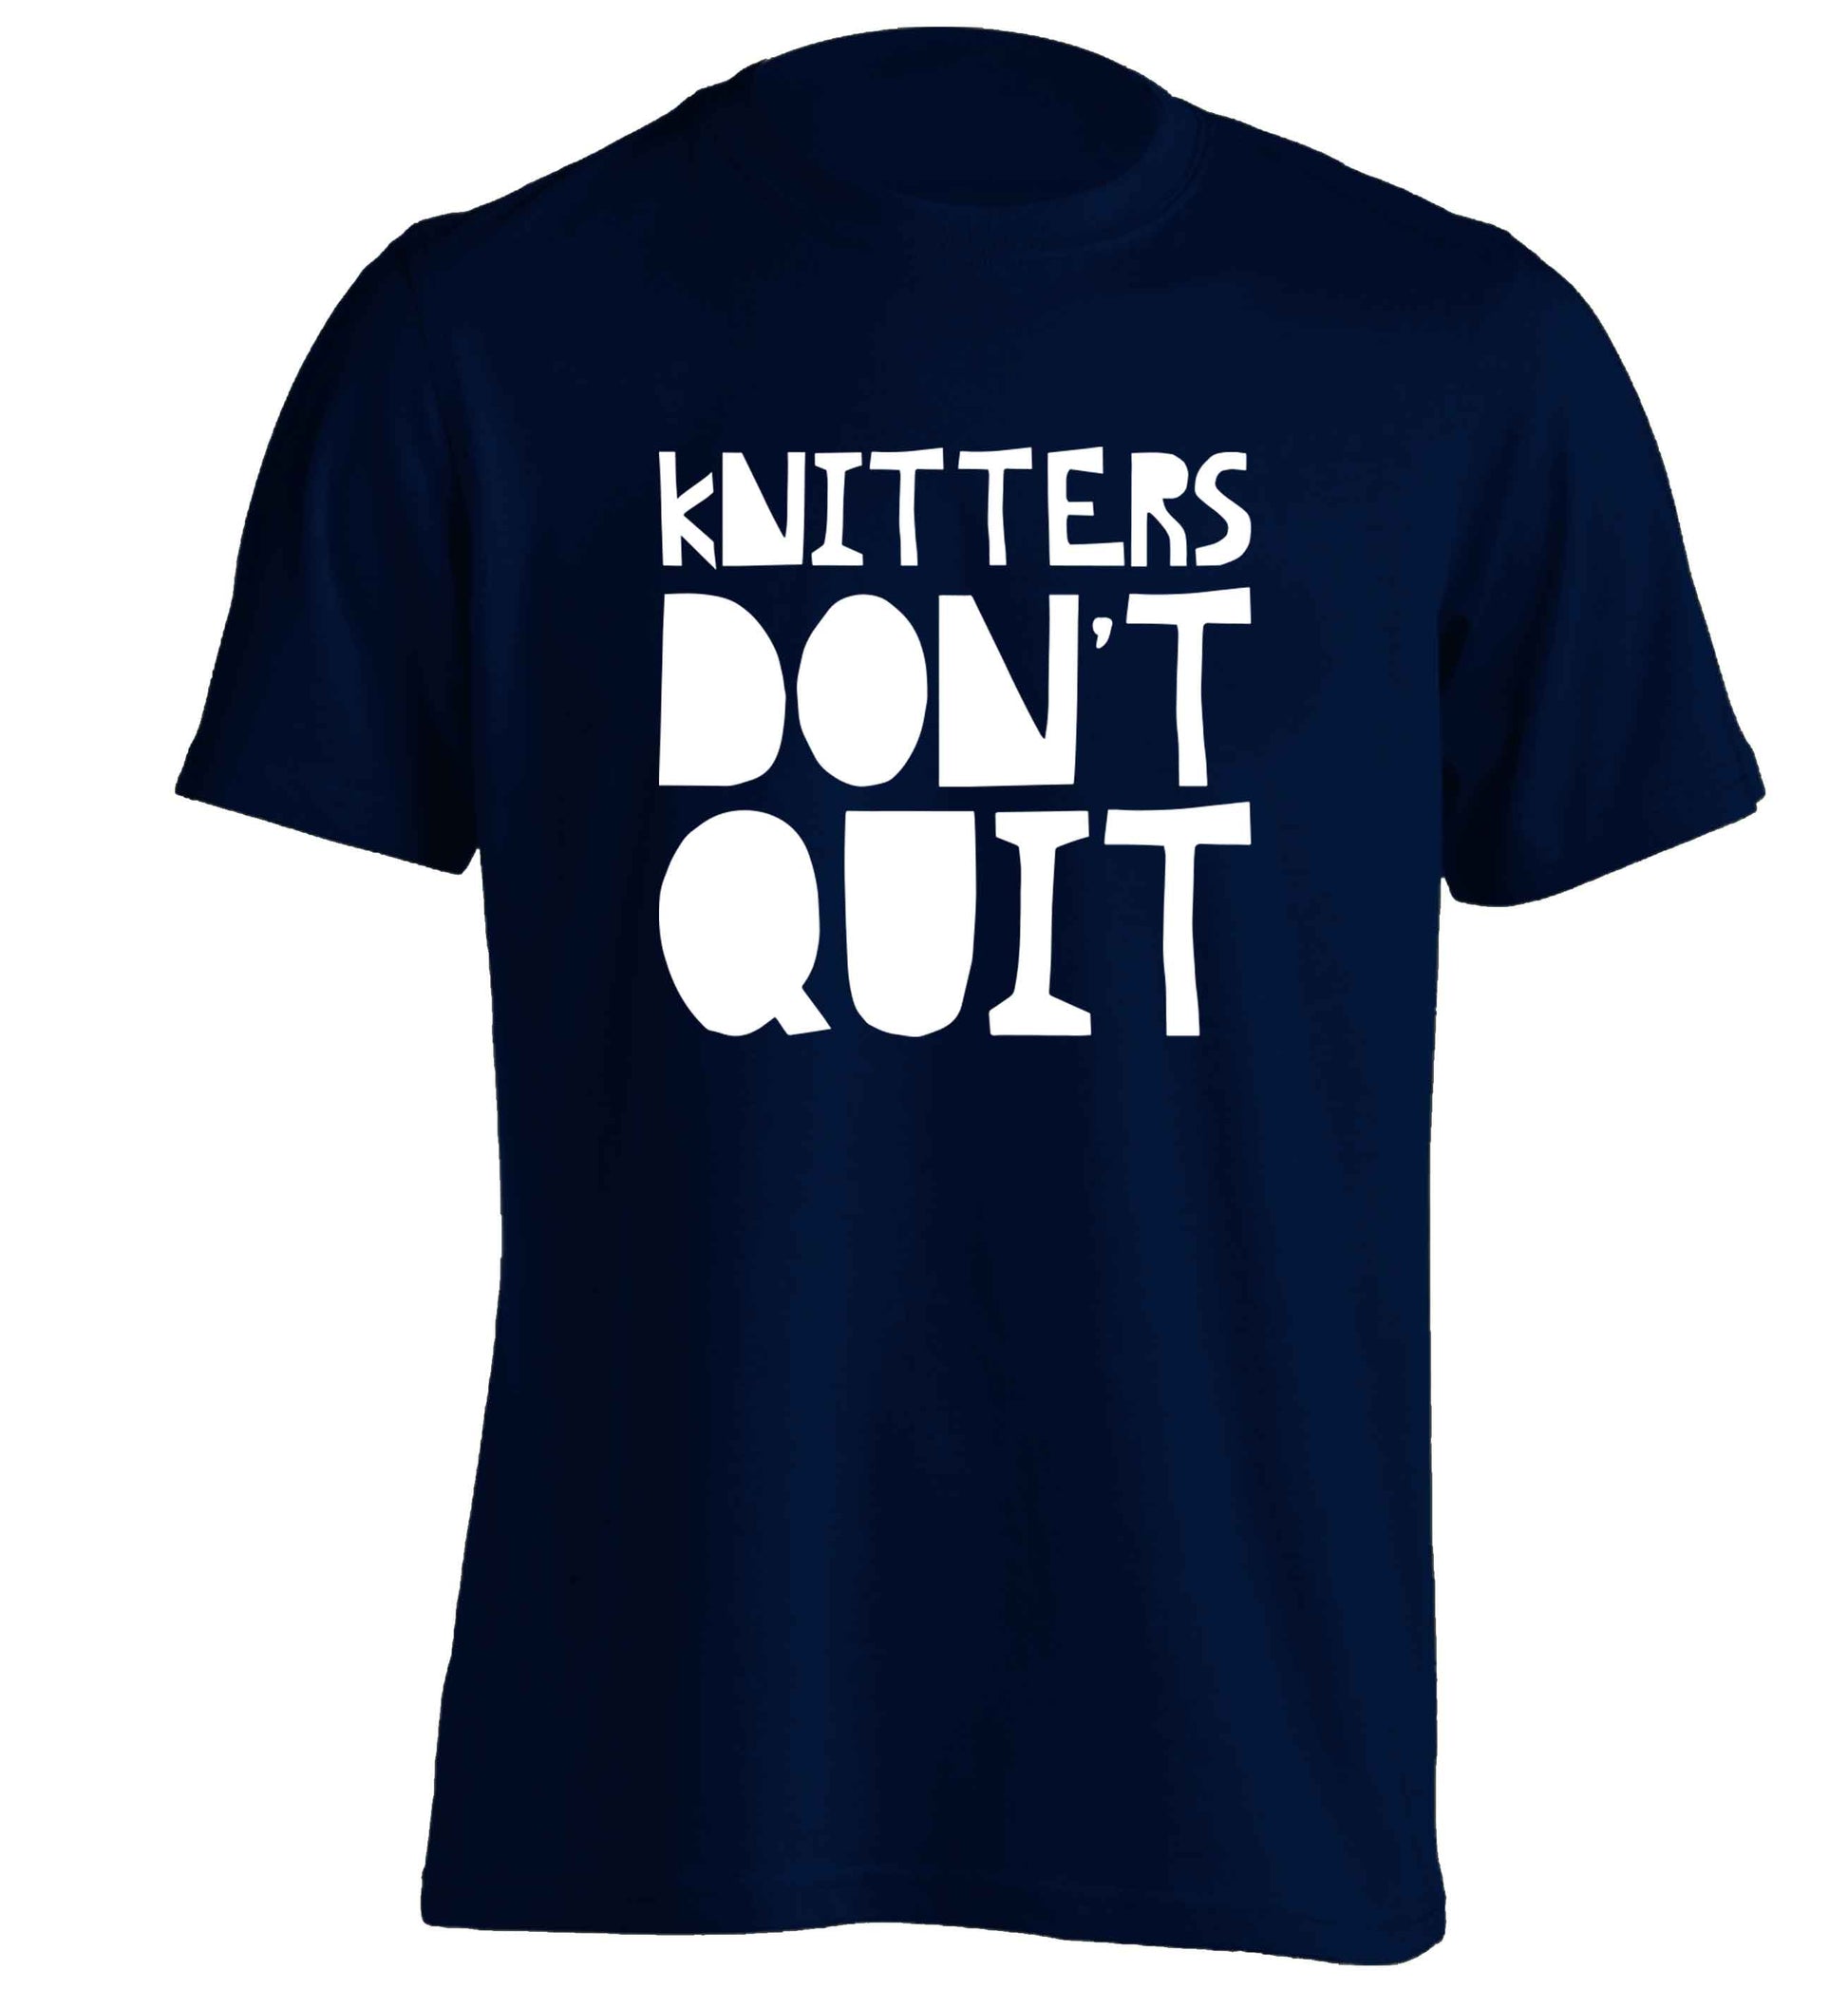 Knitters don't quit adults unisex navy Tshirt 2XL